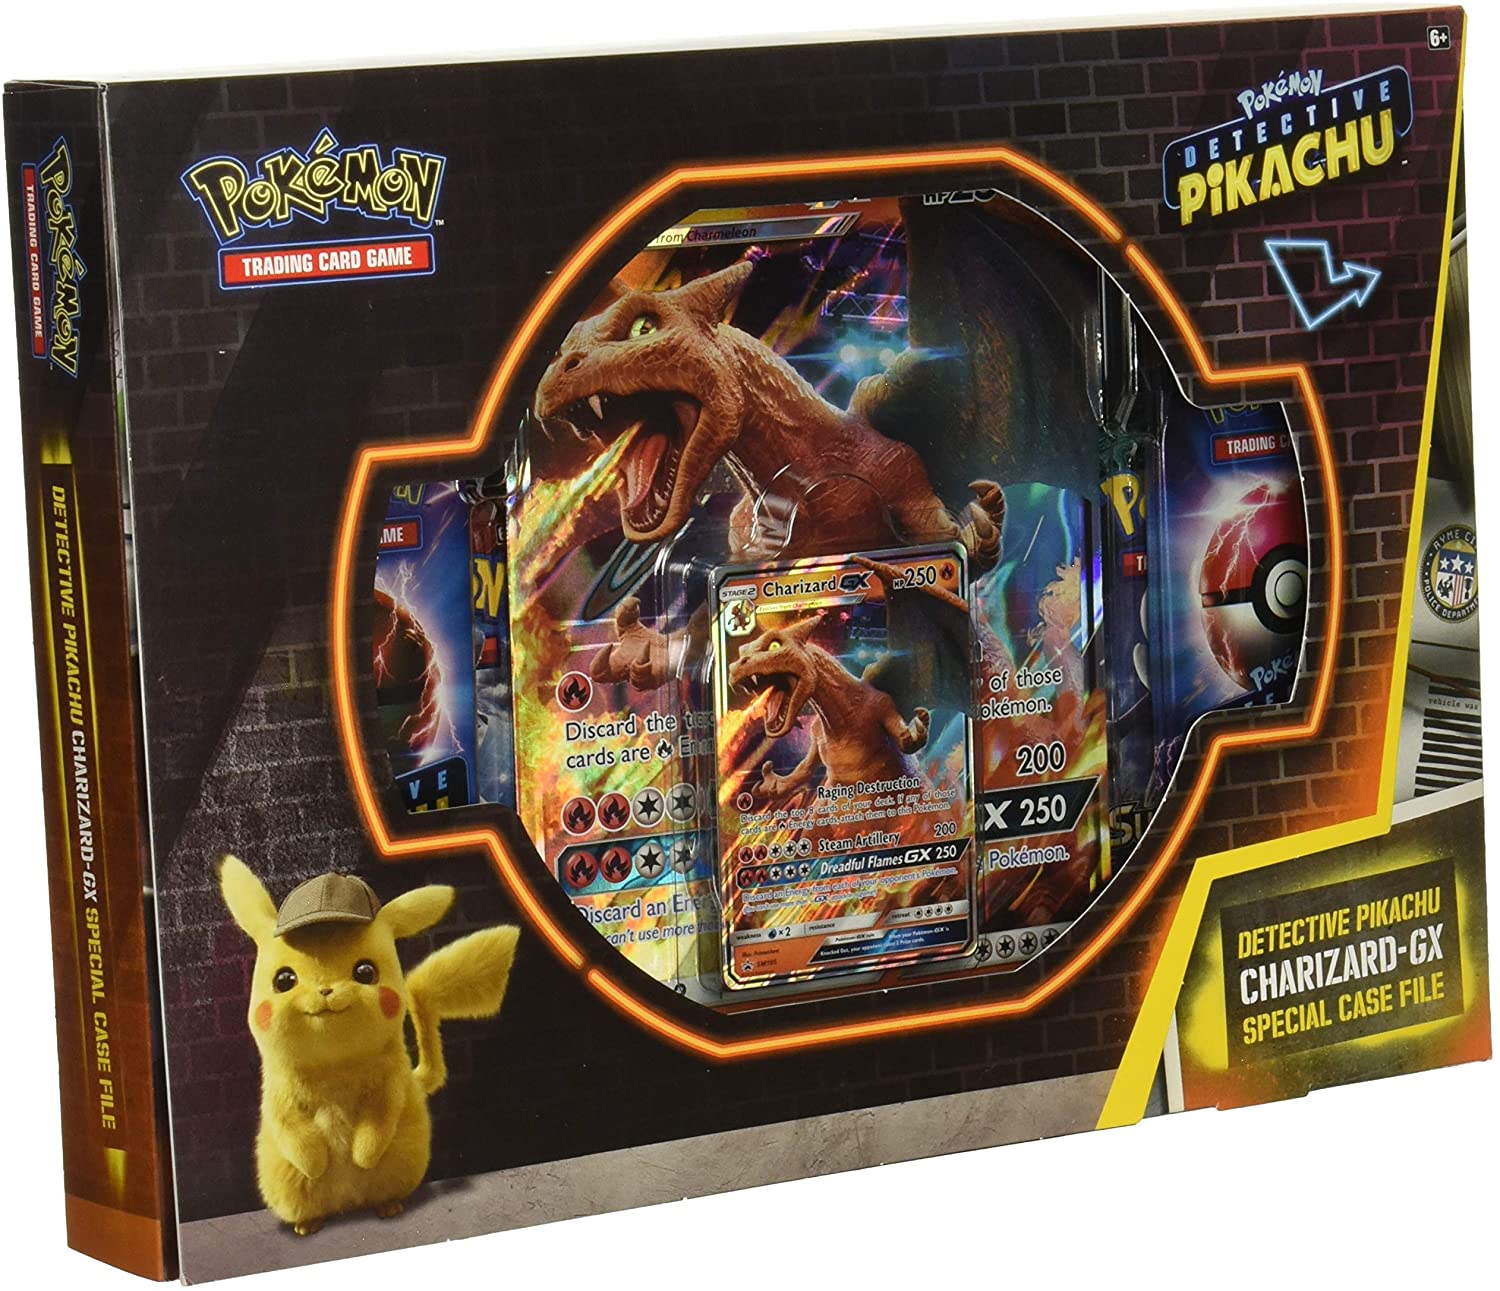 Detective Pikachu -  Charizard GX Special Case File